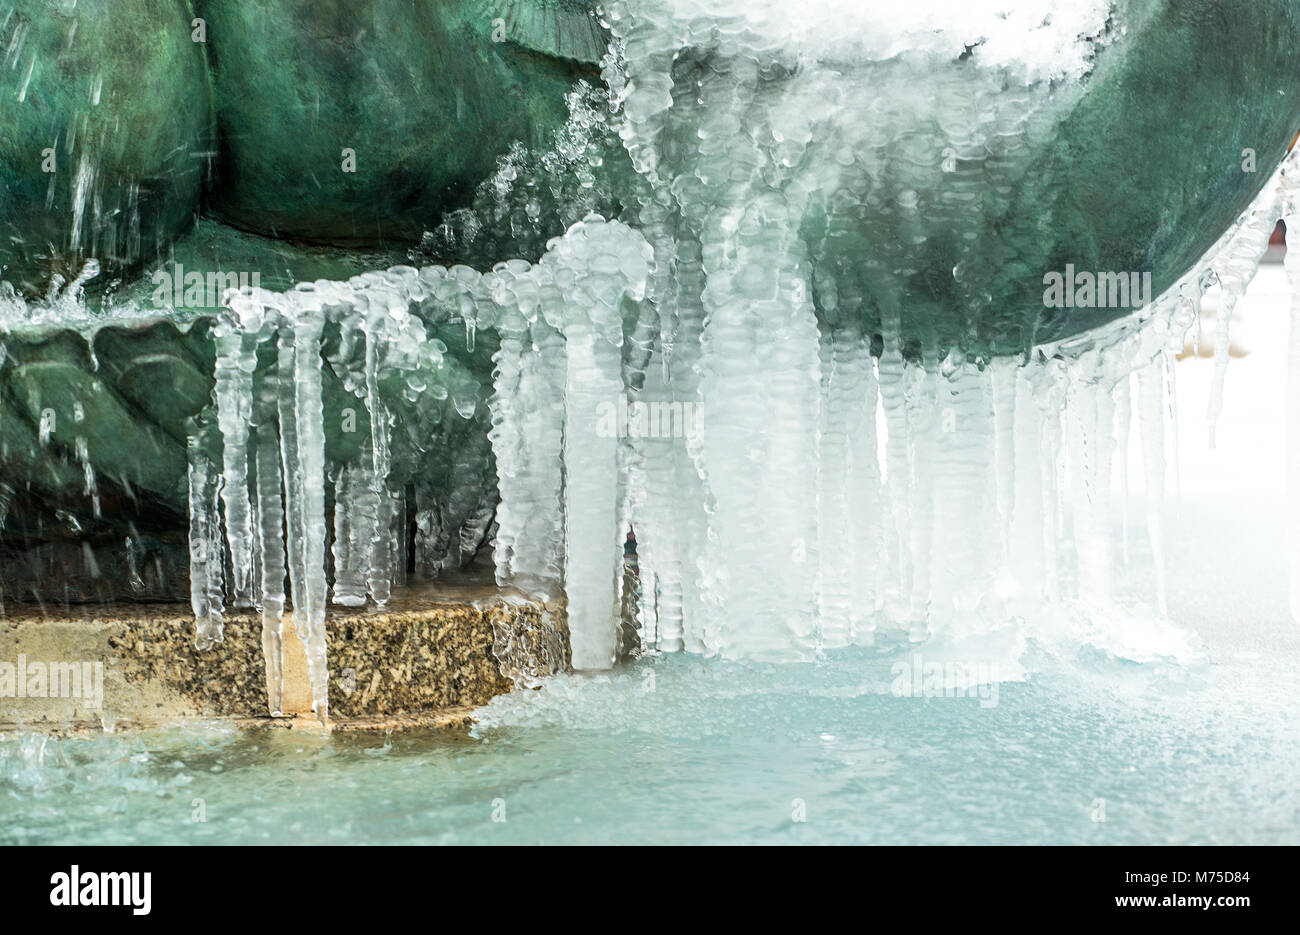 The fountains and water sculptures at Trafalgar Square, London, stand frozen and covered in ice, after recent severe winter weather hit the capital. Stock Photo